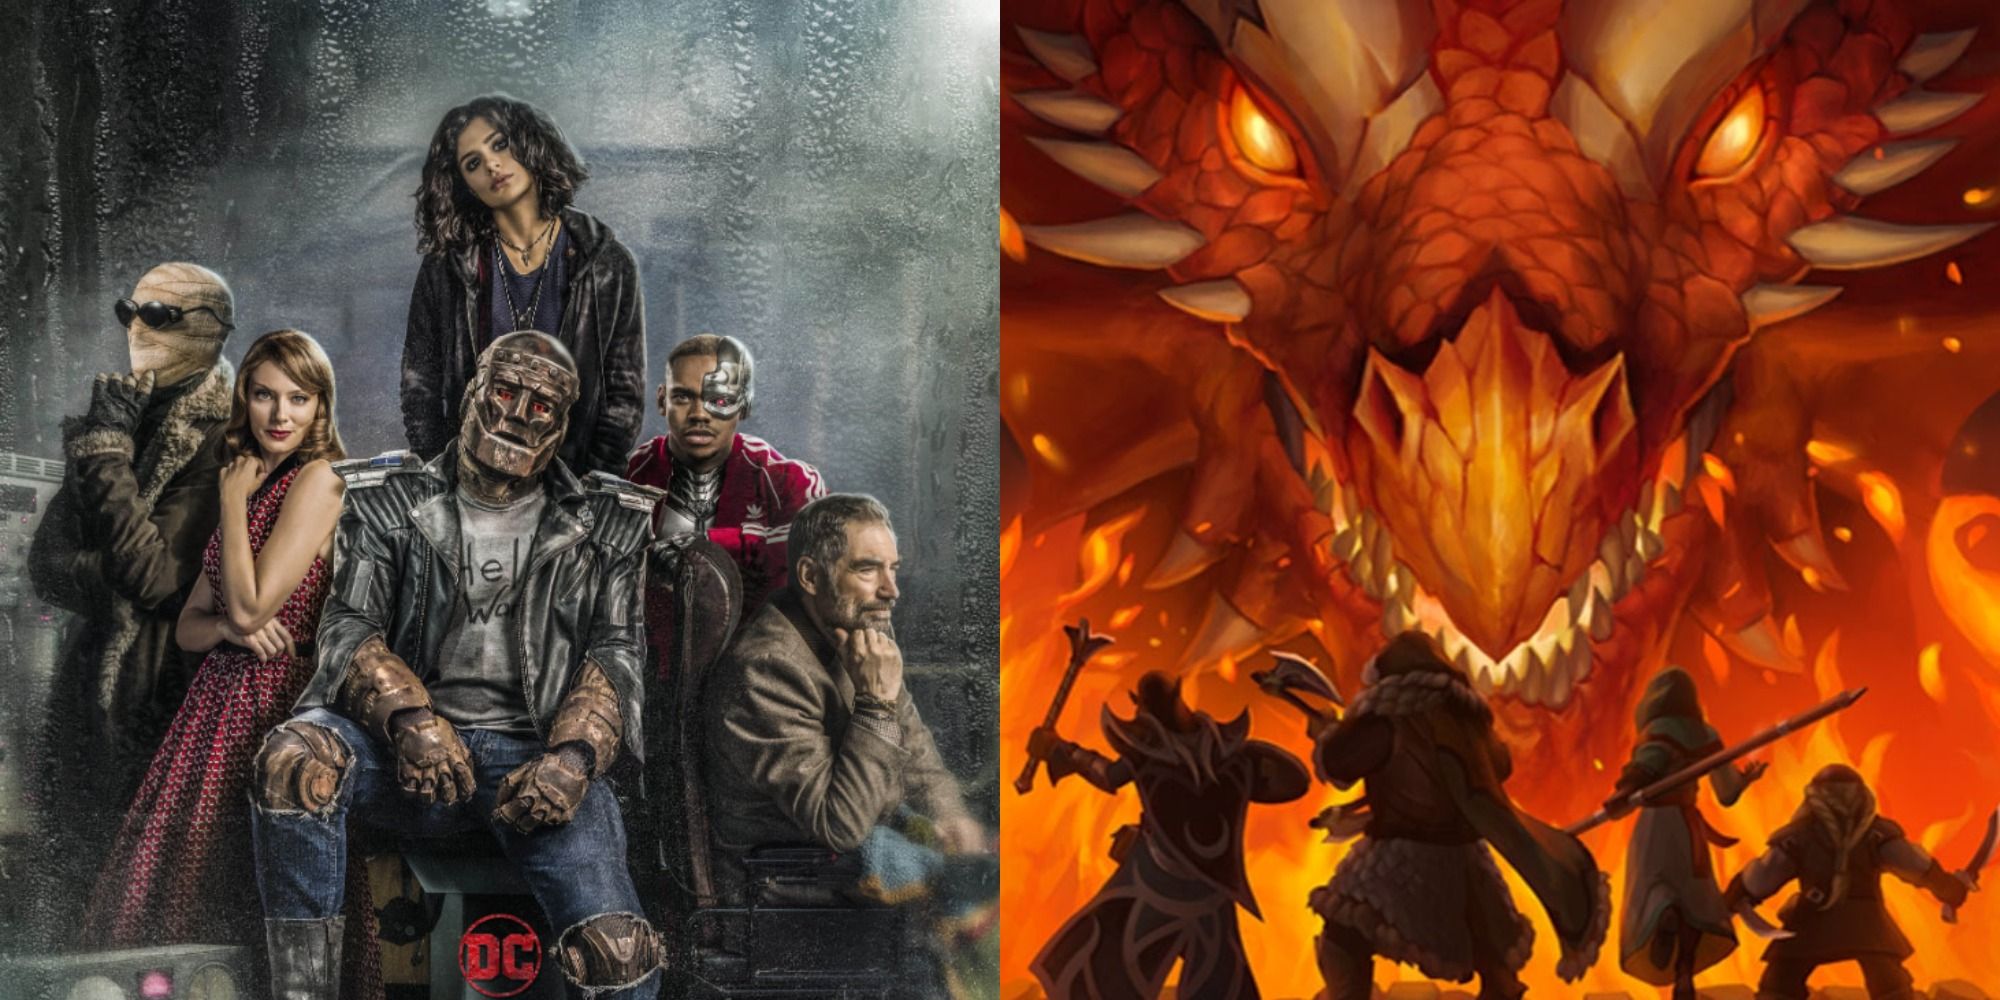 Split image showing the cast of Doom Patrol and a dragon facinf some soldiers in D&D